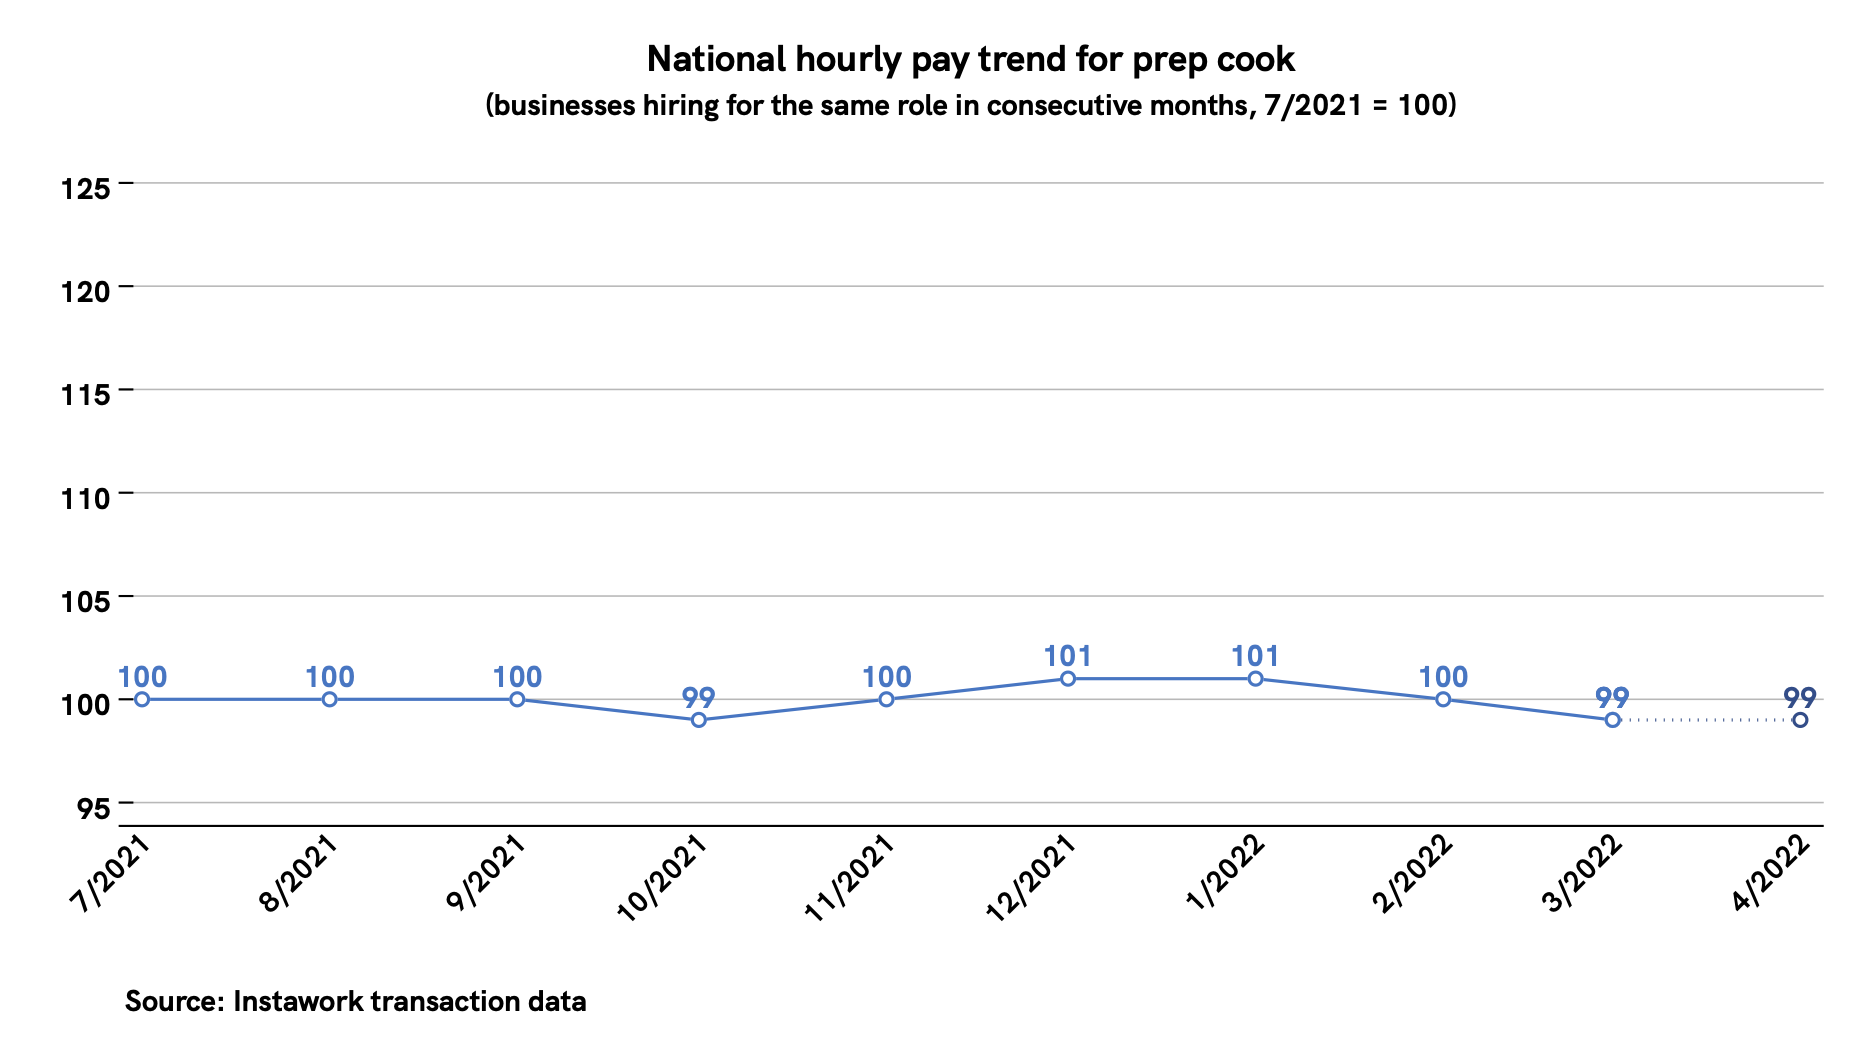 28 Mar 2022 pay trend for prep cook